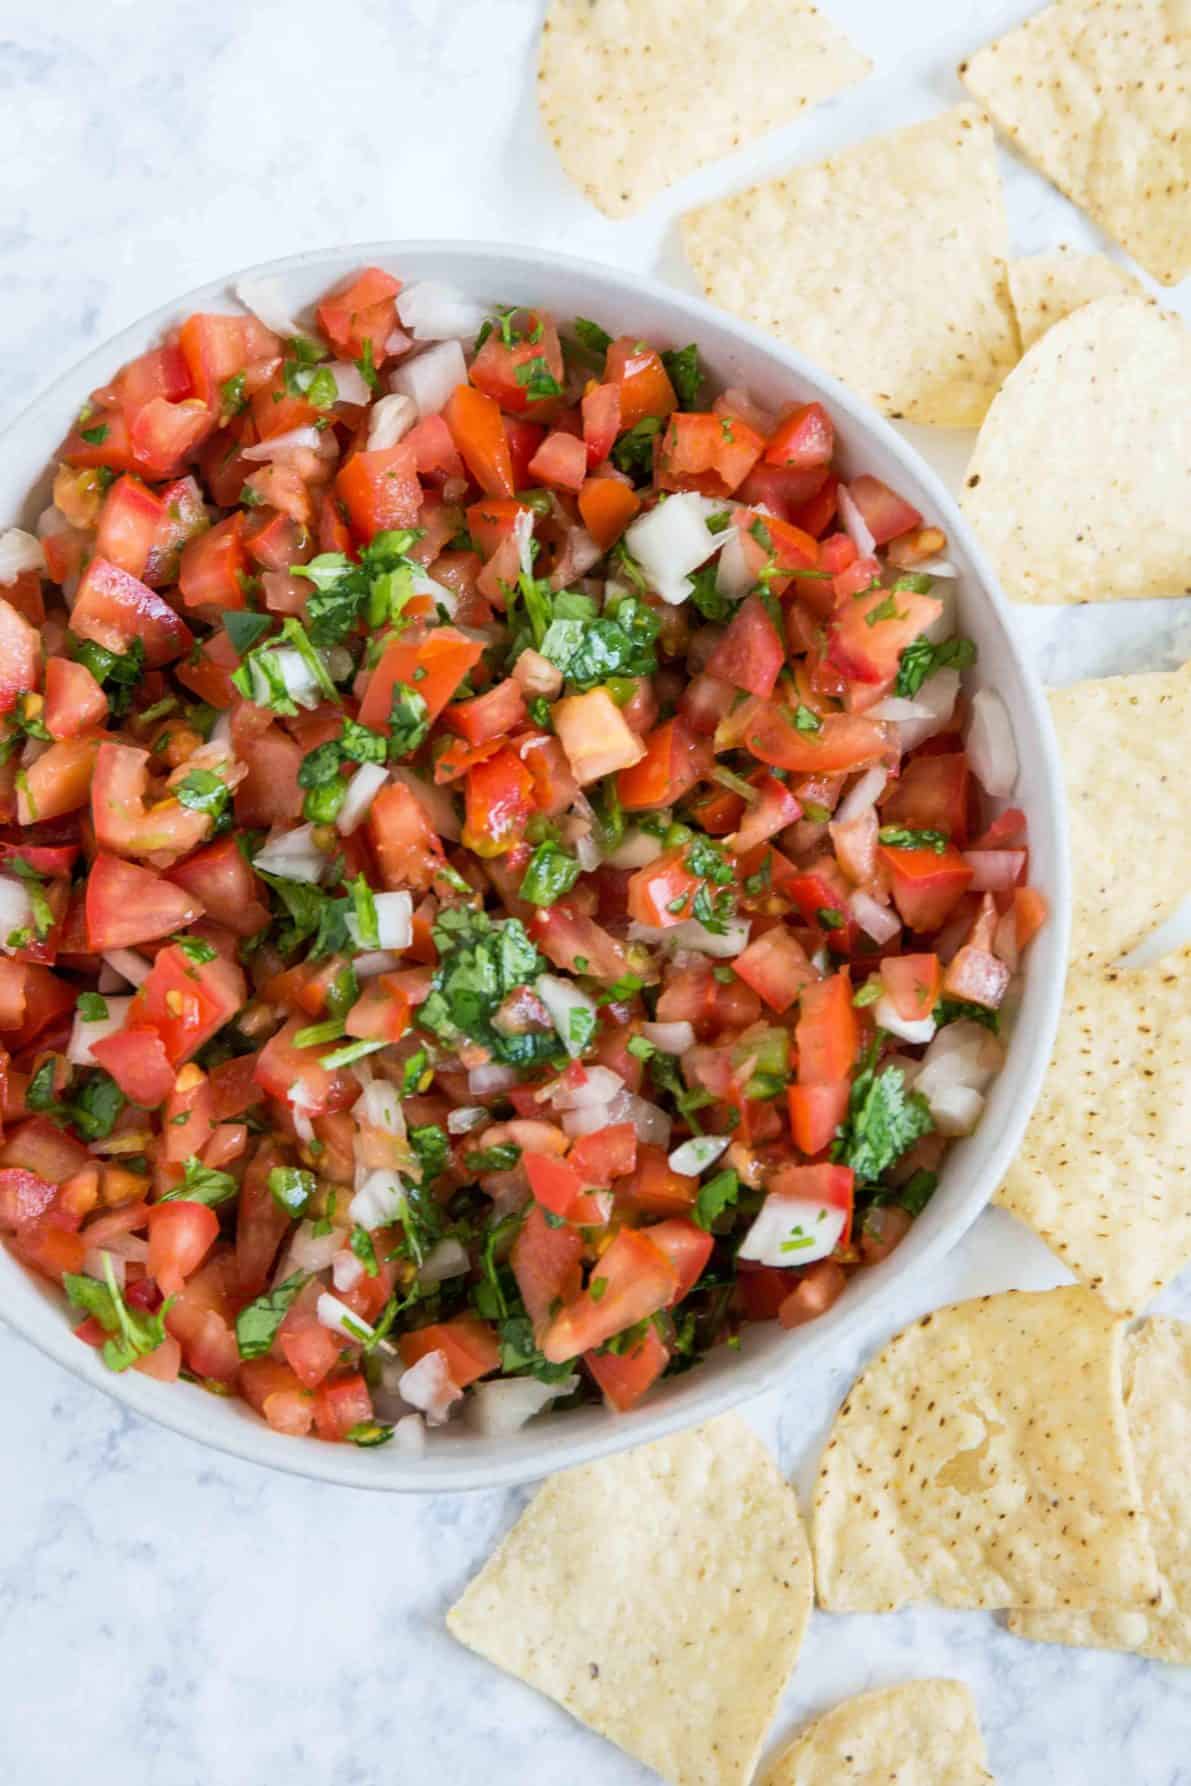 Pico de gallo in a bowl with chips around it.